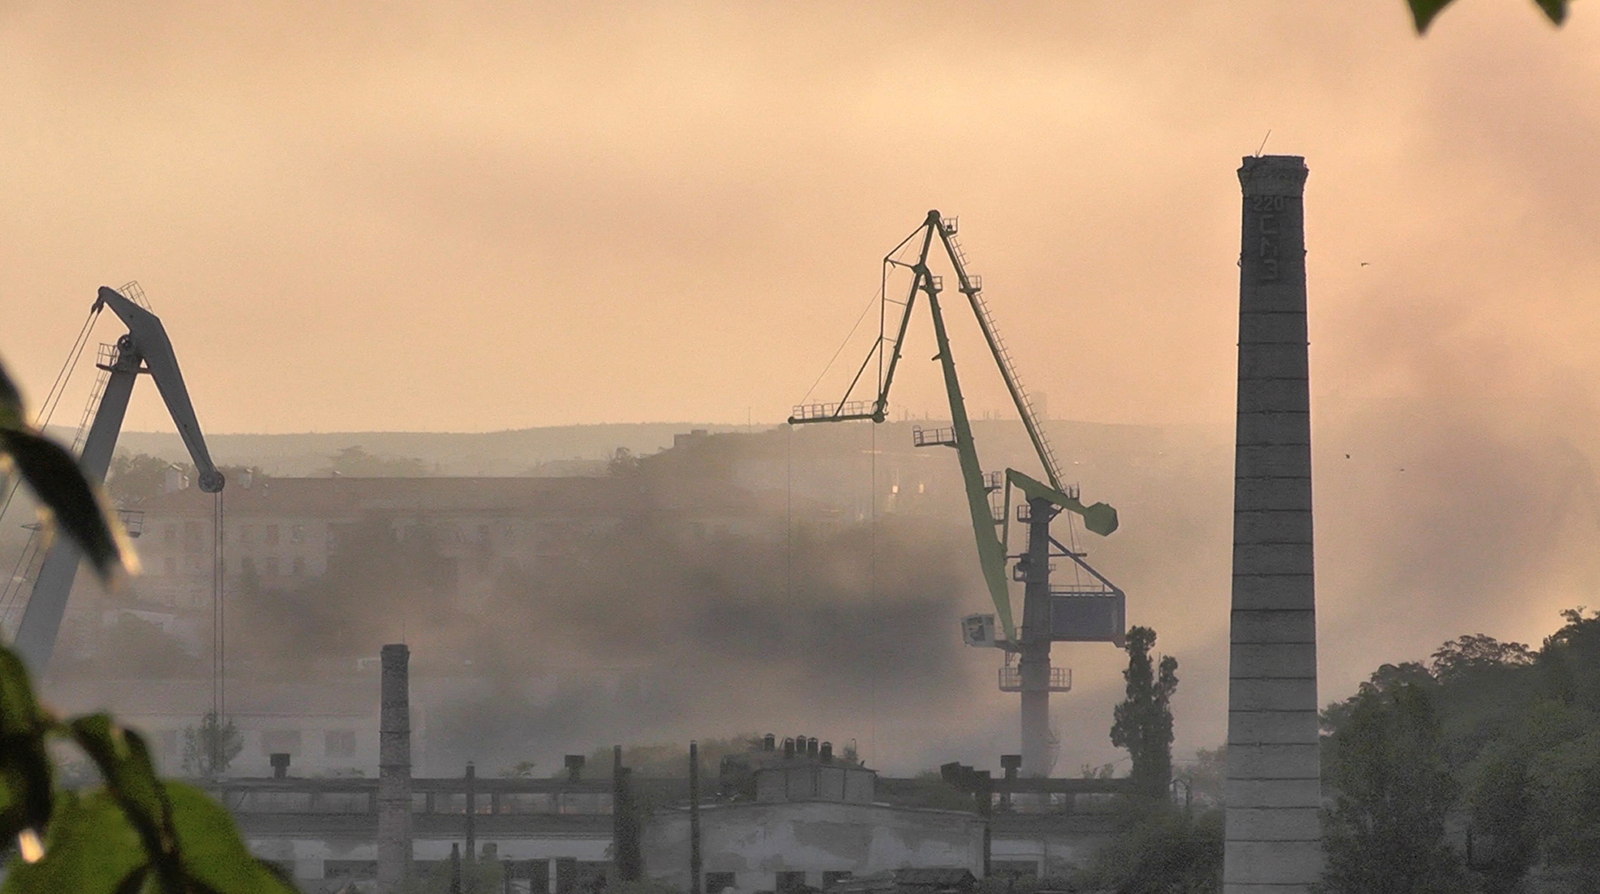 Smoke rises from the shipyard that was reportedly hit by Ukrainian missile attack in Sevastopol, Crimea, in this still image from video taken September 13.